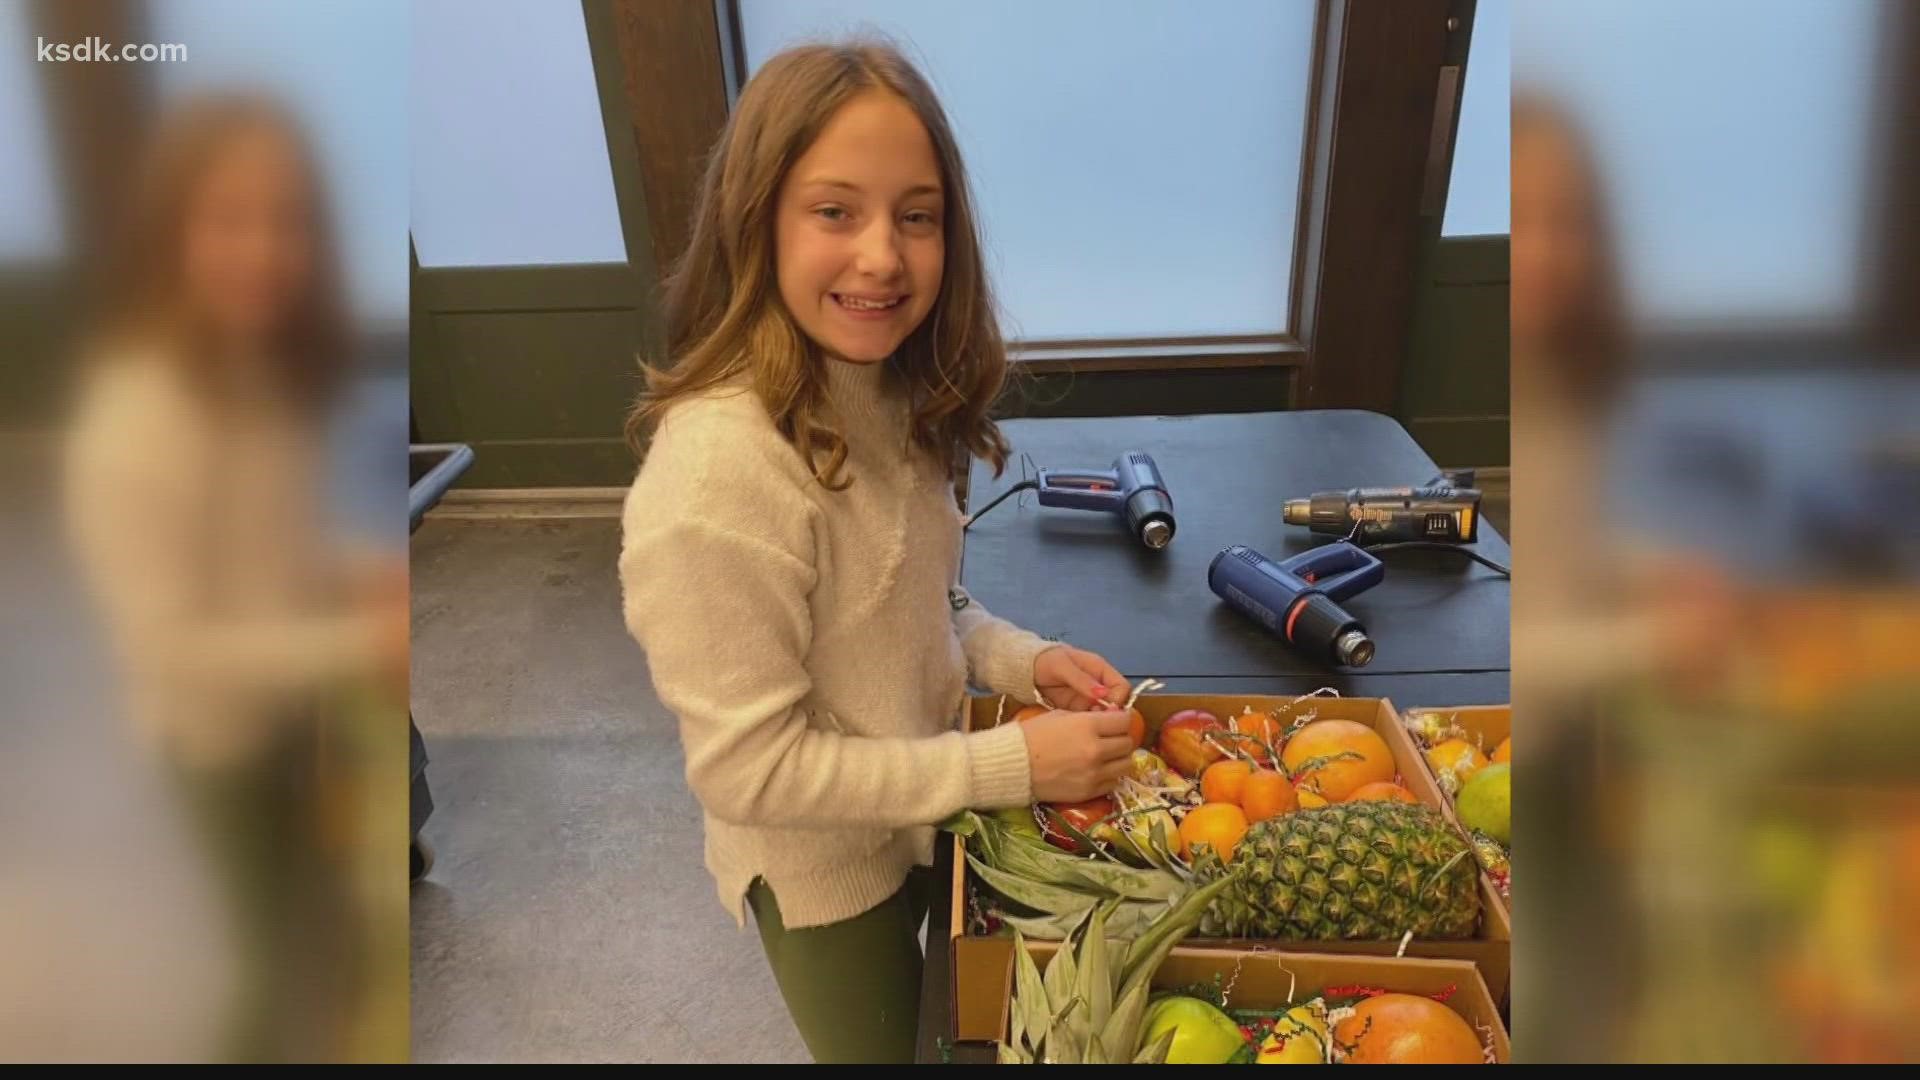 Claire Corley learned something she didn't know about her beloved grandfather at his funeral: every holiday he'd buy fruit and make baskets for those in need.